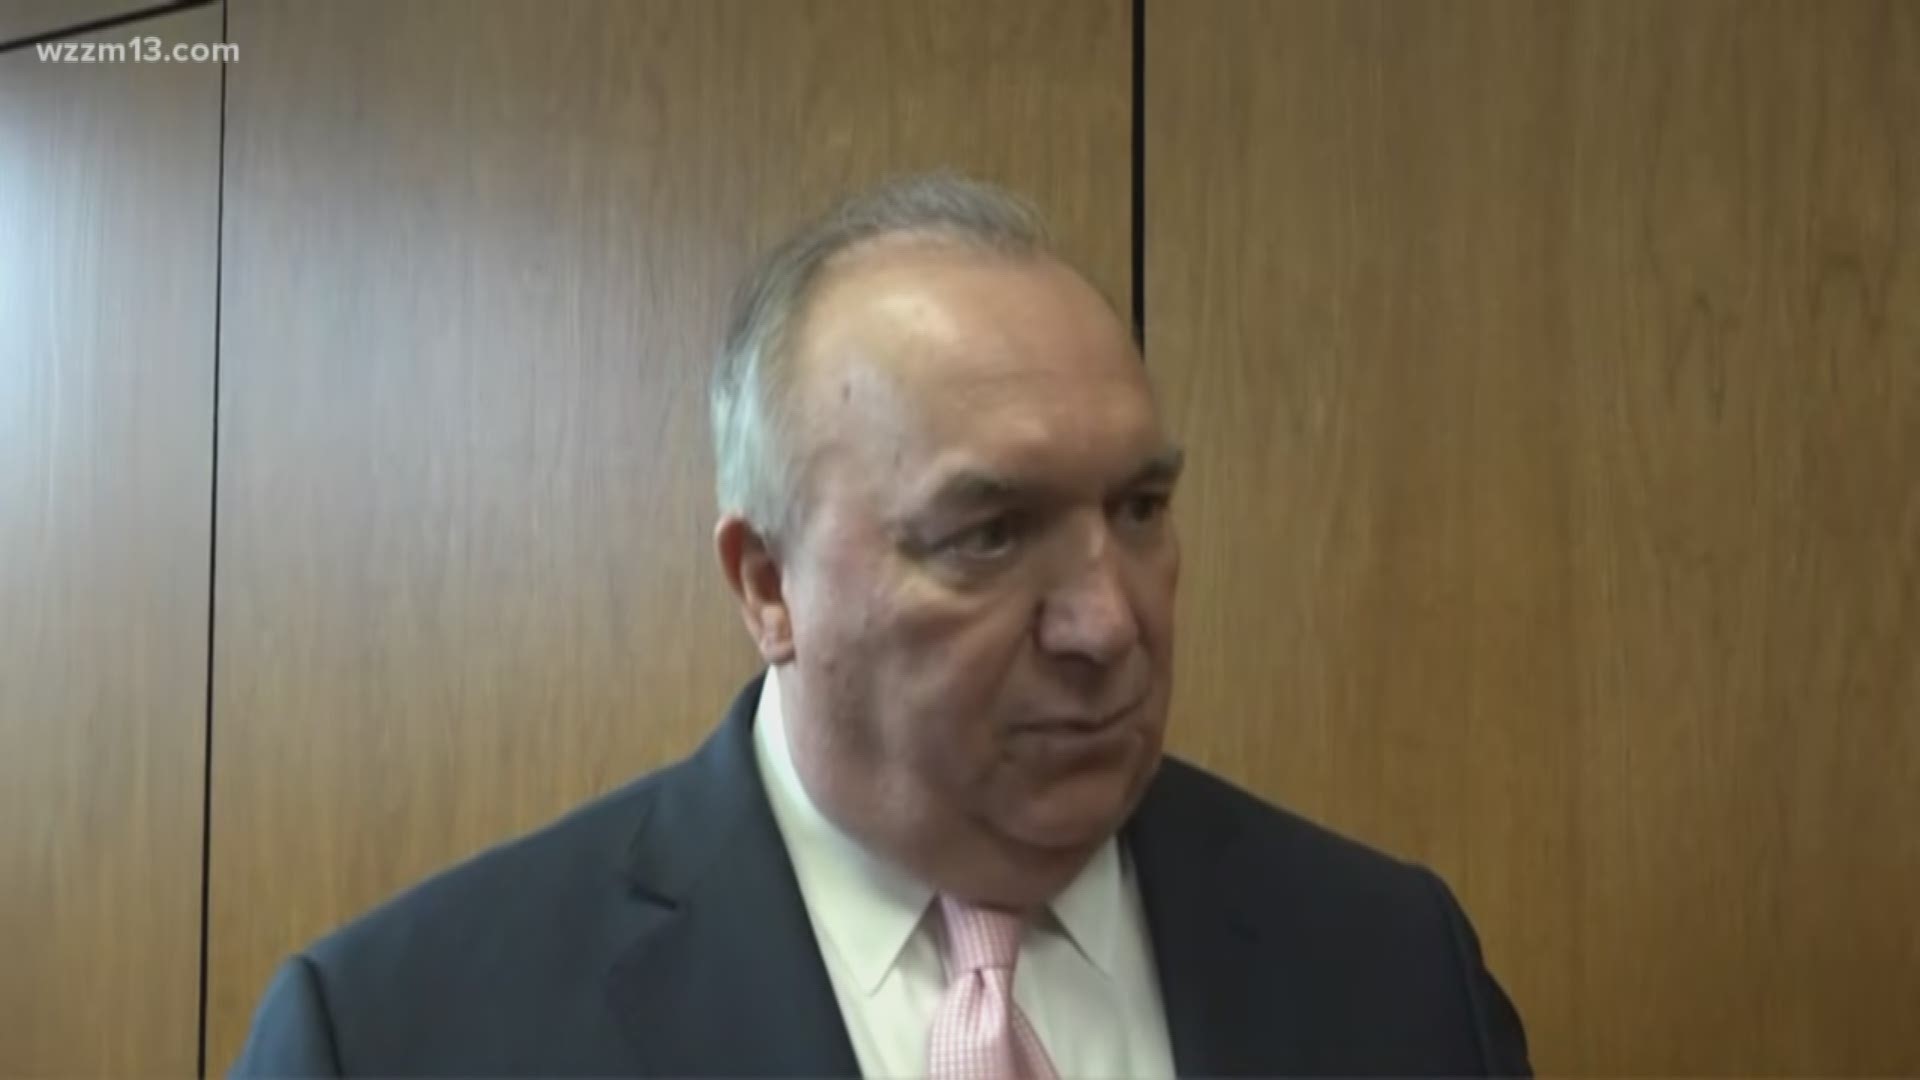 One-on-one with John Engler, June 22, 2018.